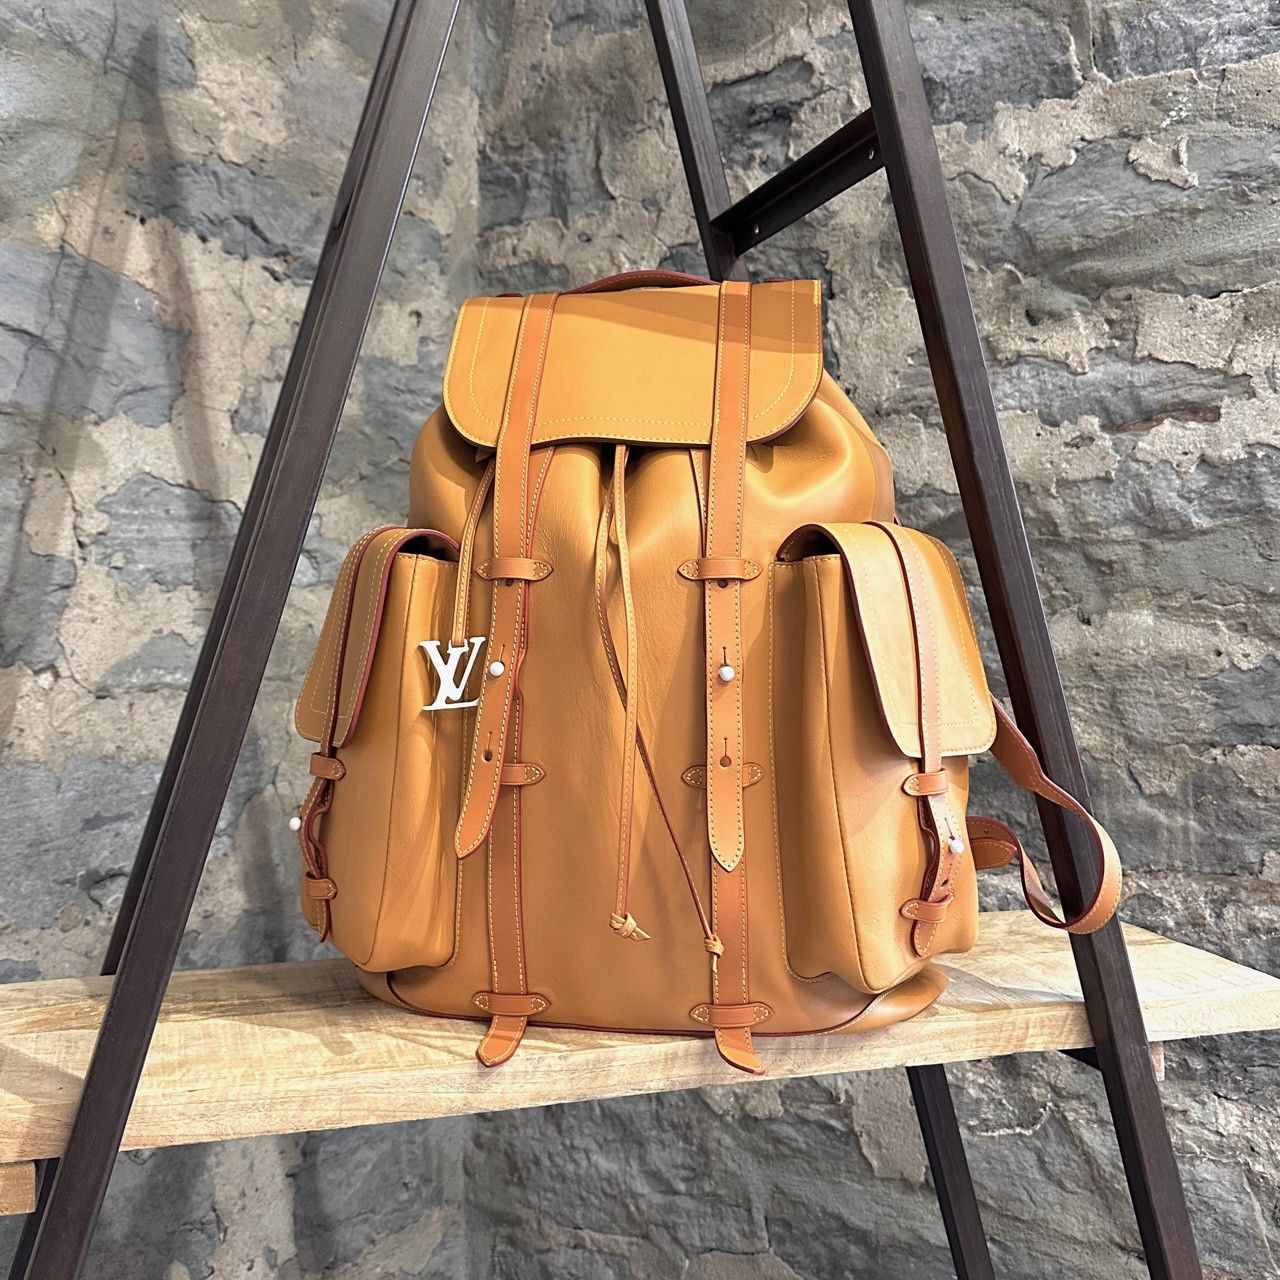 Louis Vuitton Christopher Backpack Vachetta Leather GM